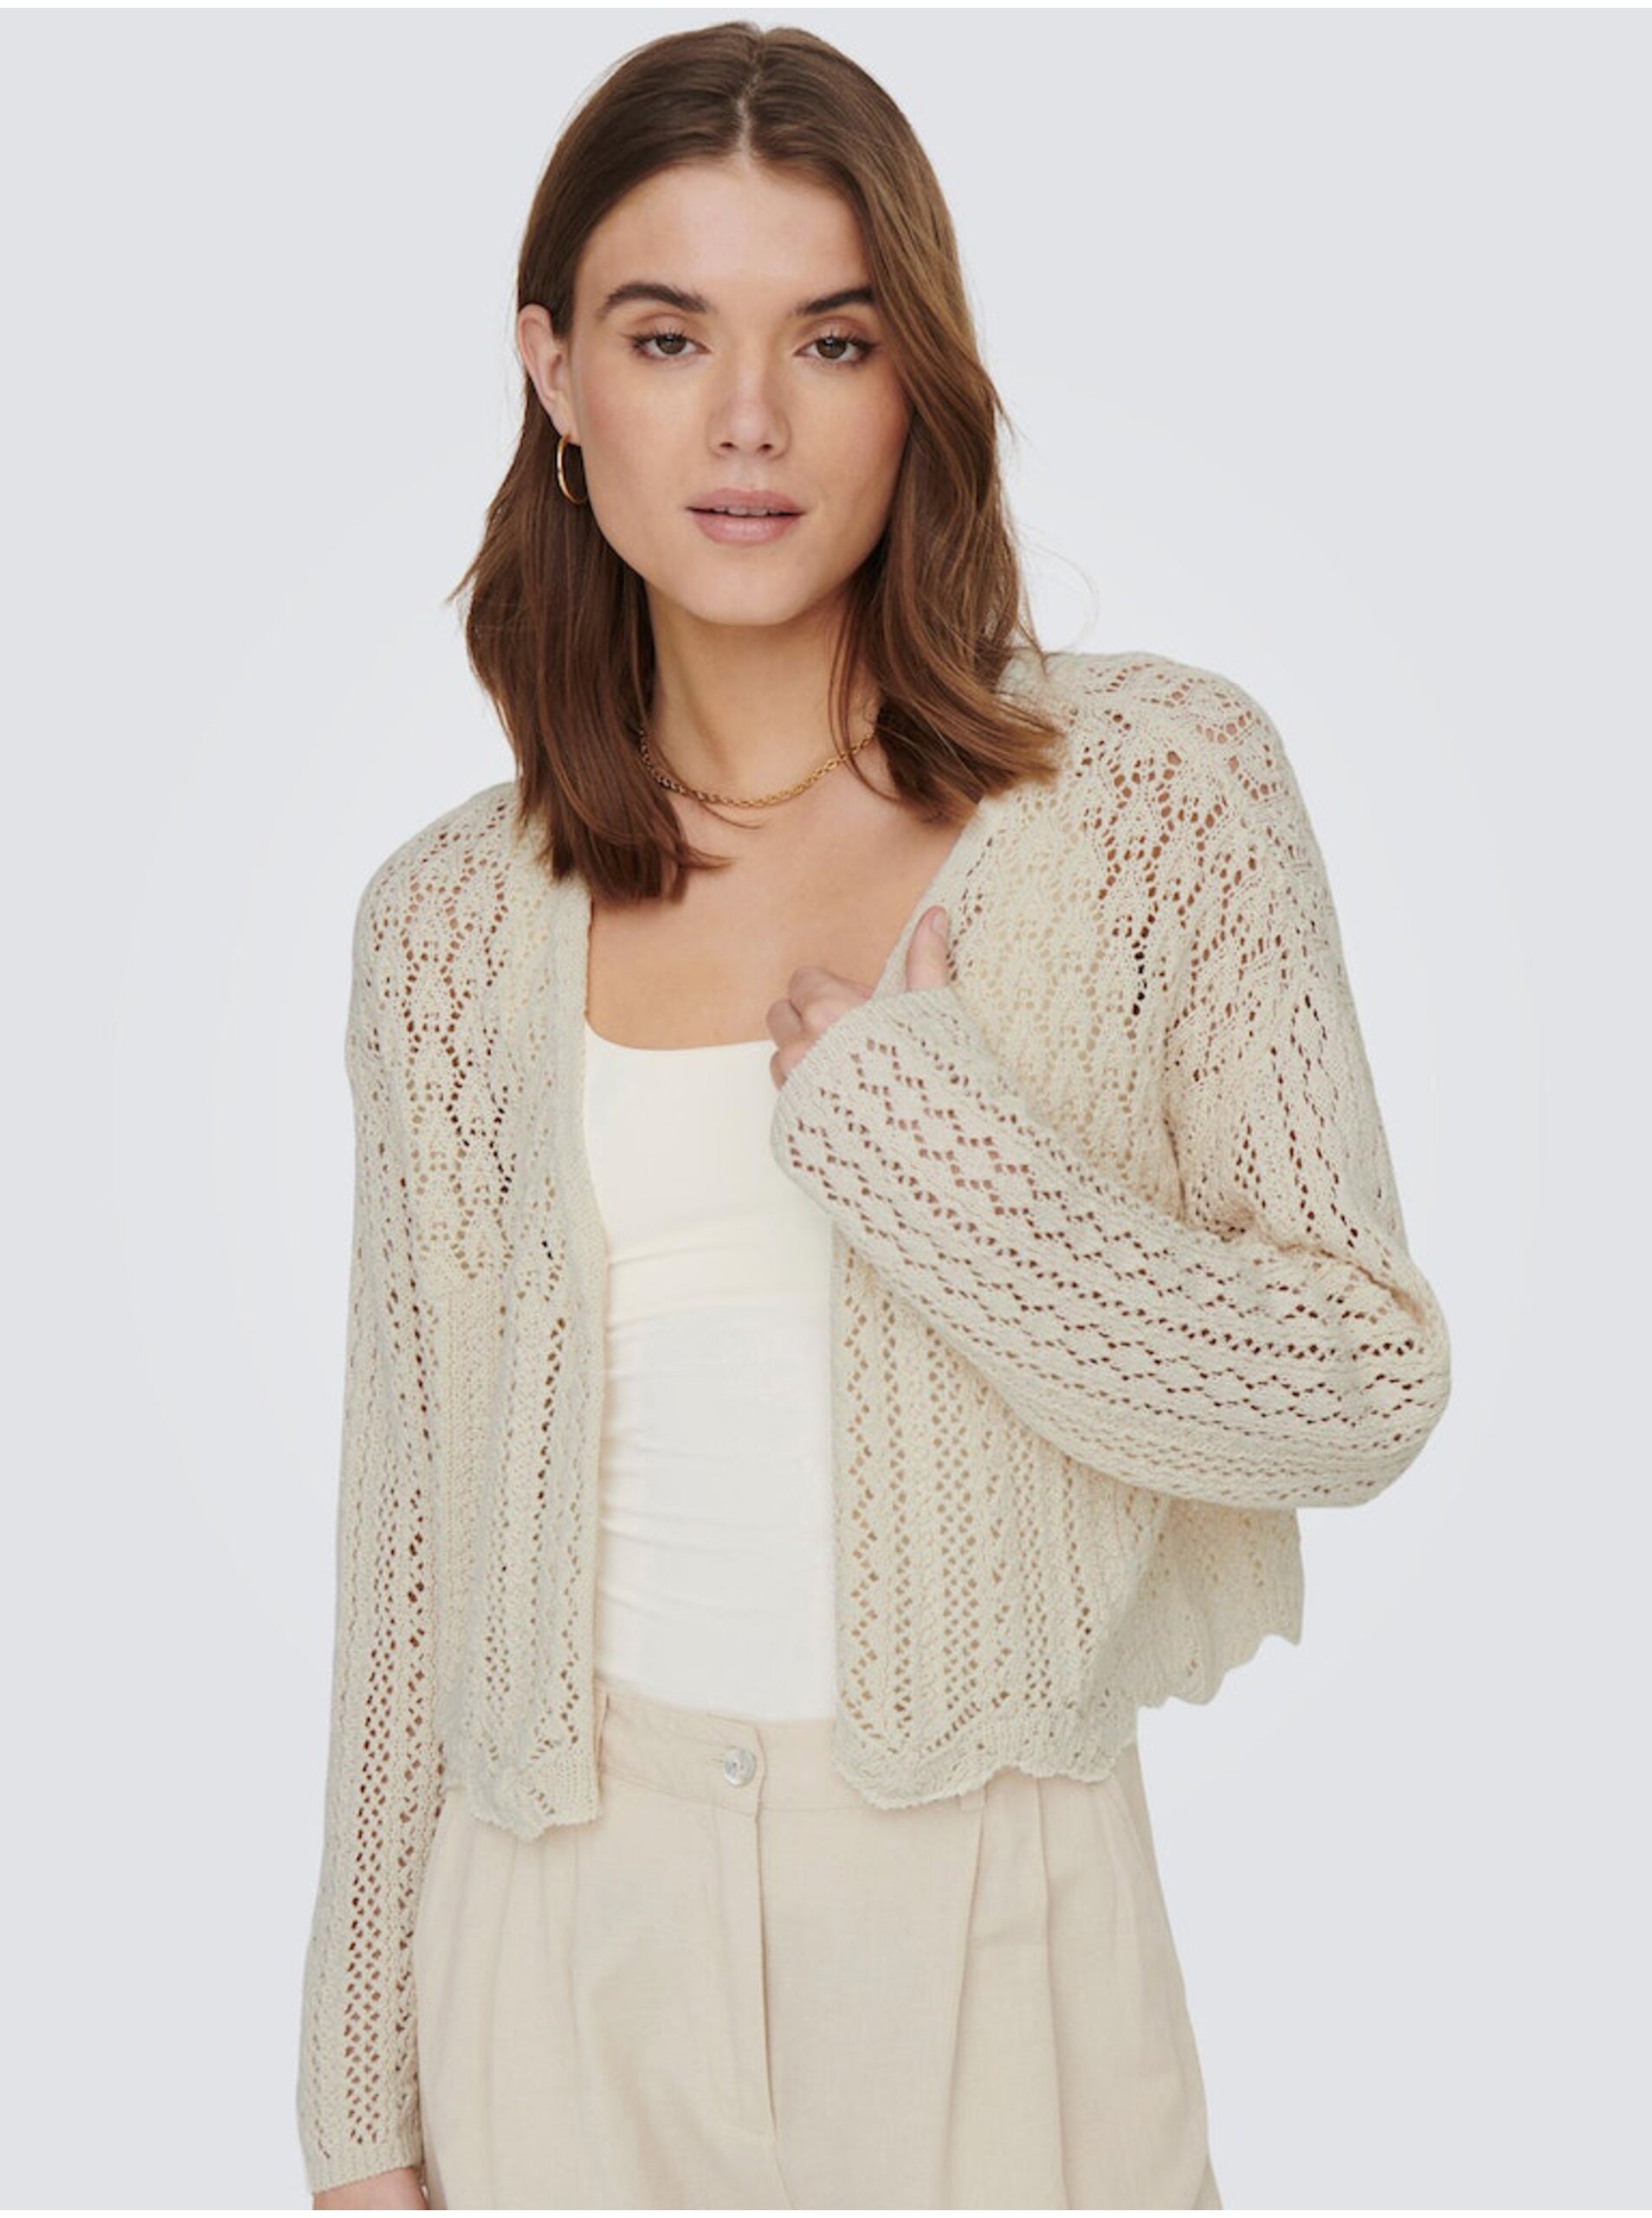 Women's creamy perforated cardigan ONLY Nola - Women's